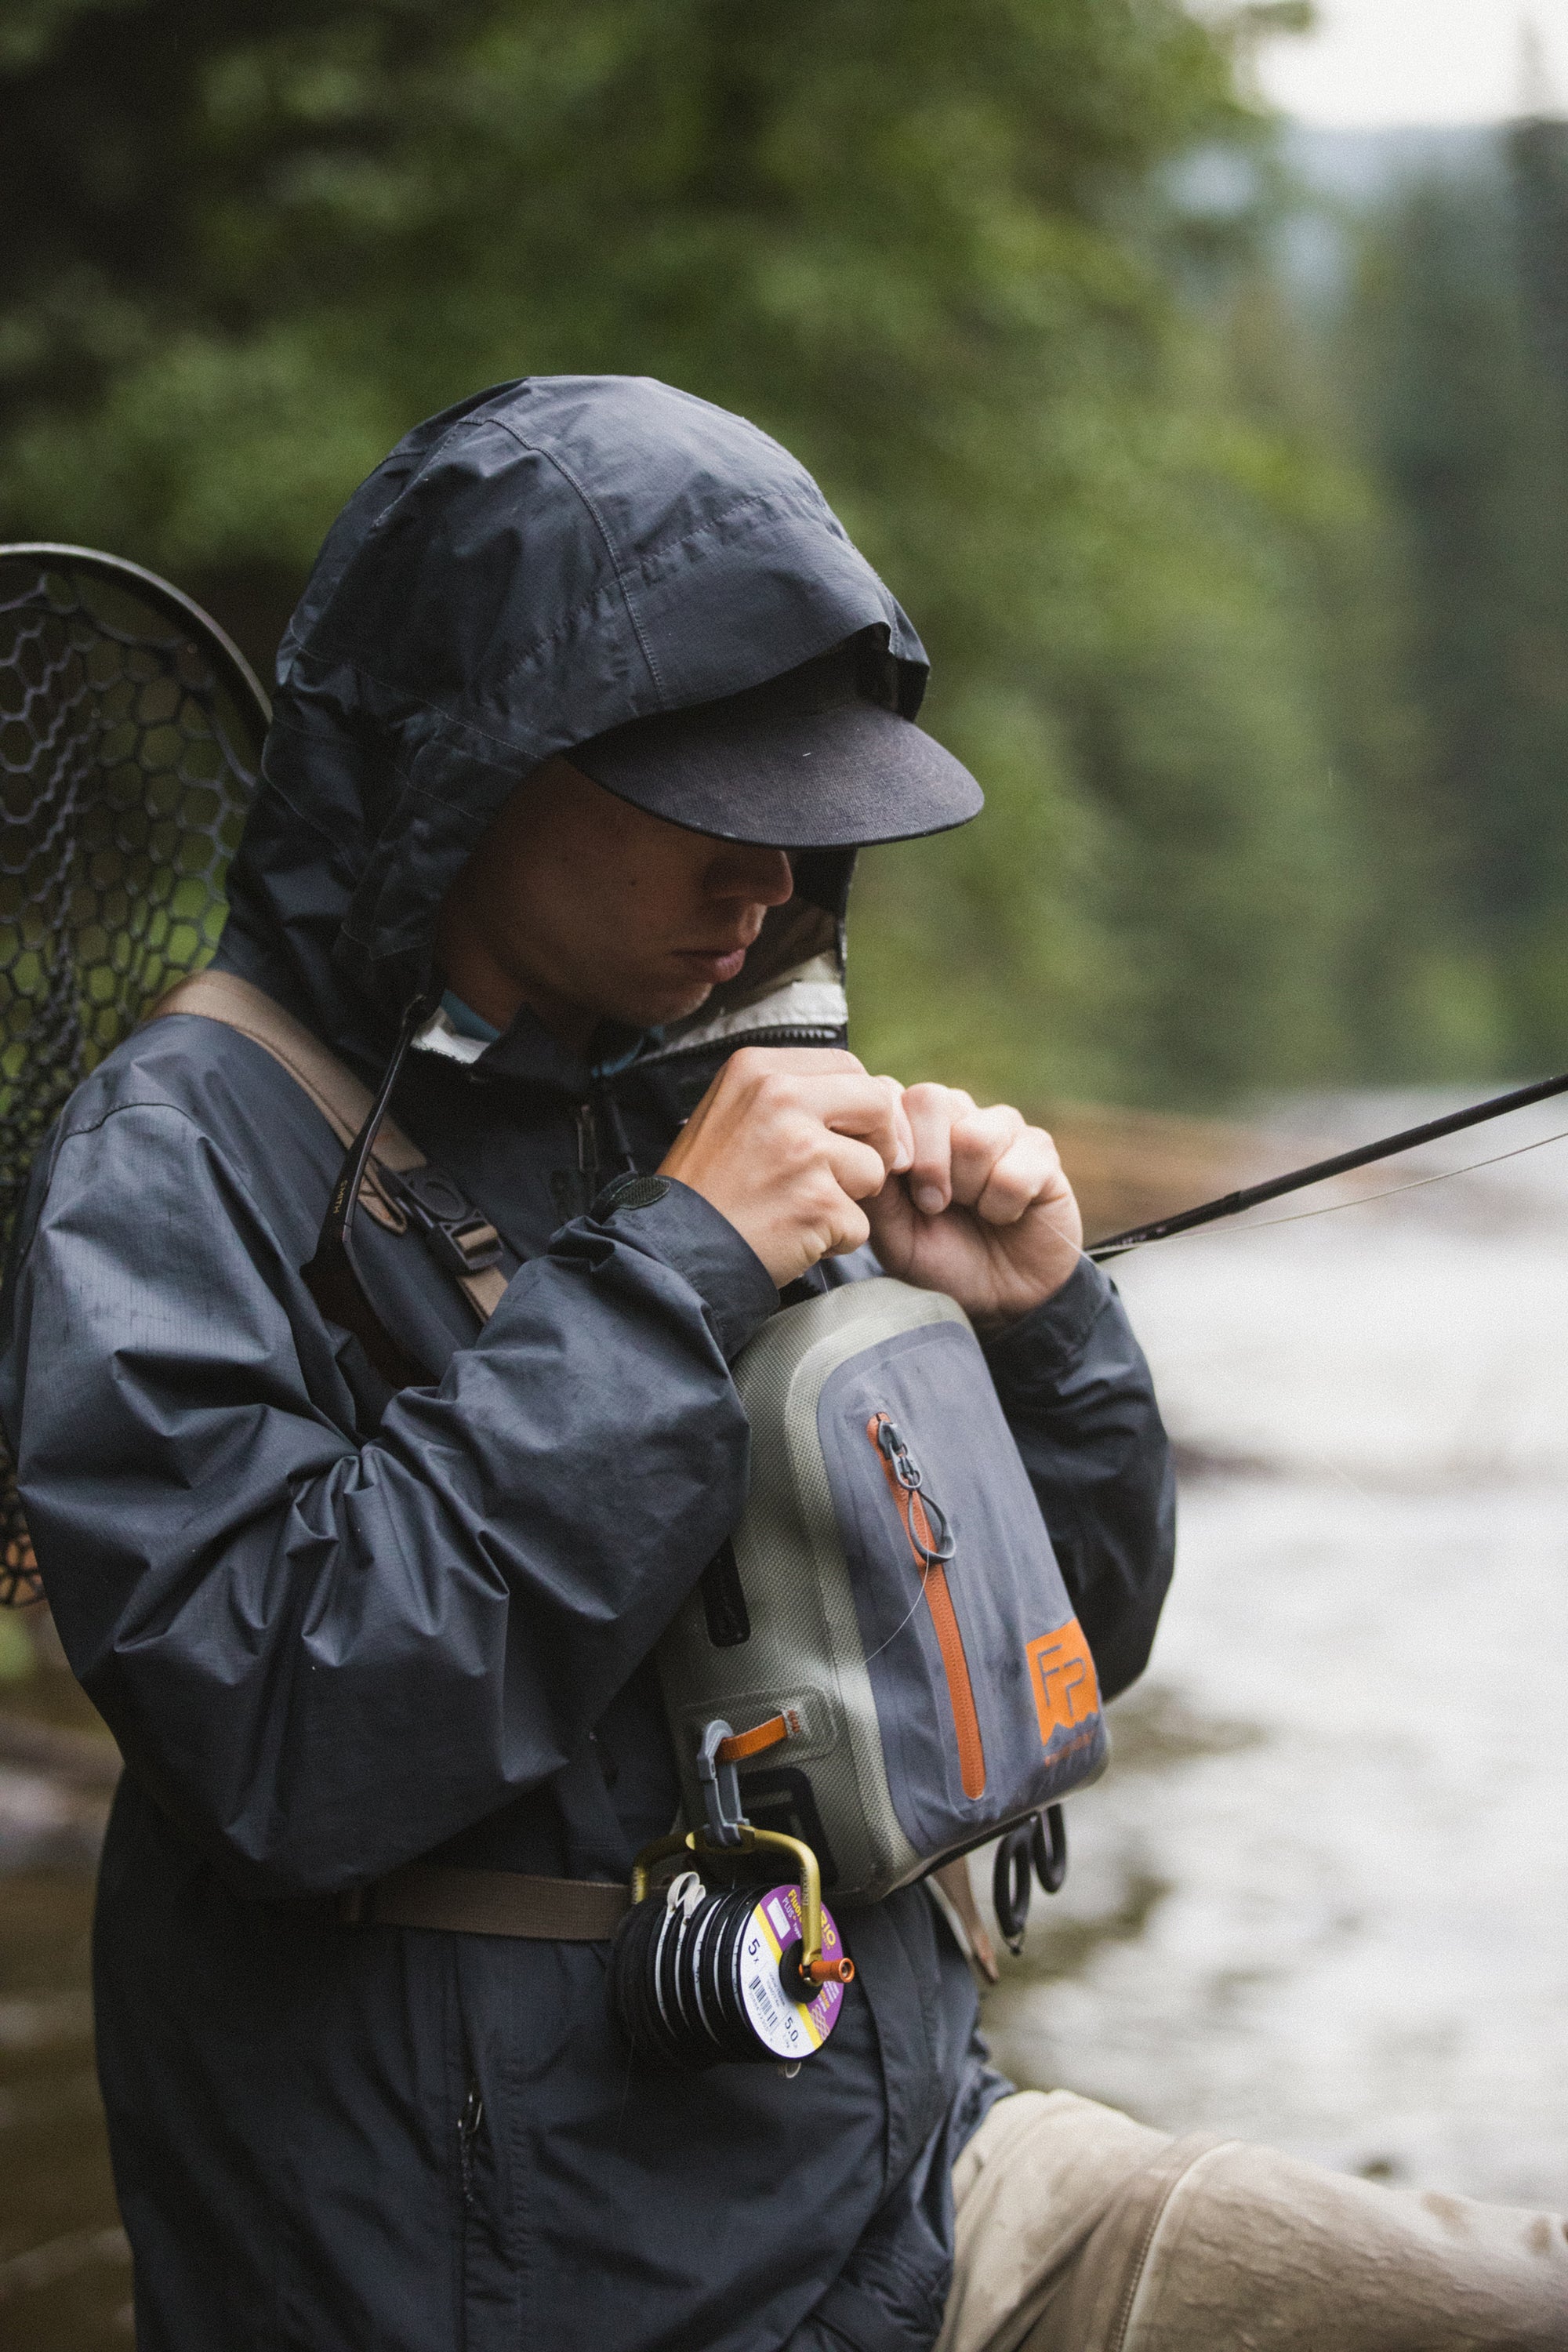 Shop Fly Fishing Chest Packs: Fishpond, Simms, and More